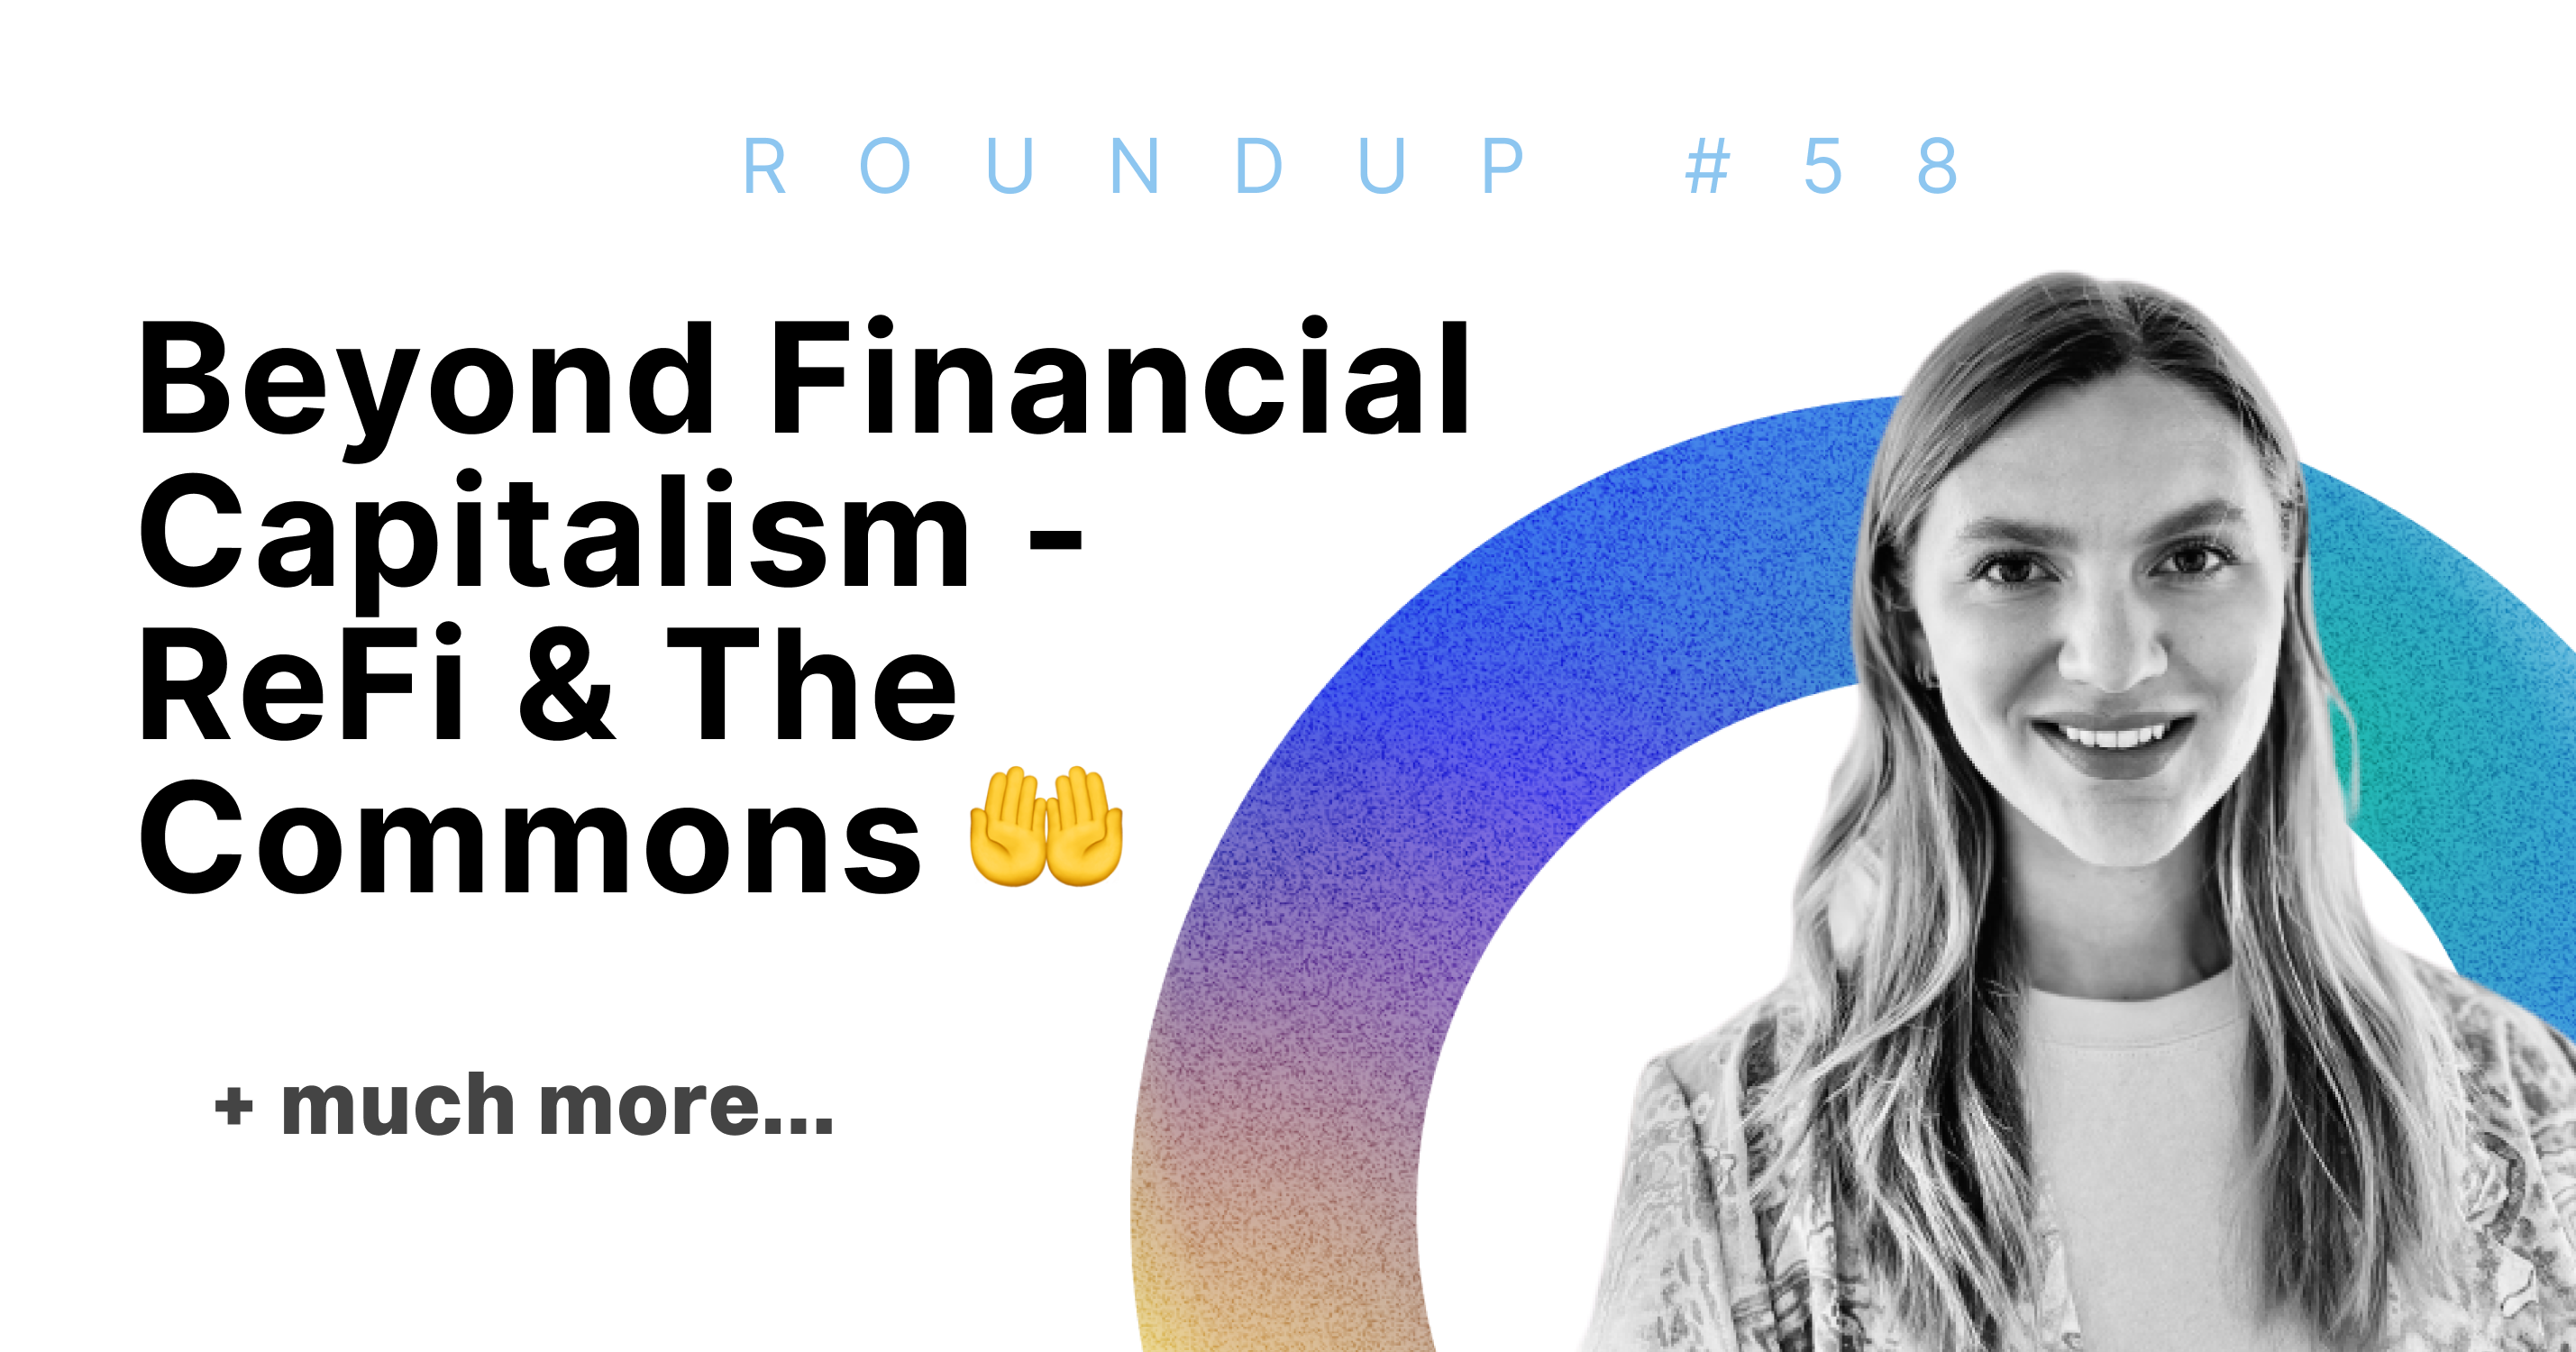 Beyond Financial Capitalism - ReFi & The Commons 🤲 | Roundup #58